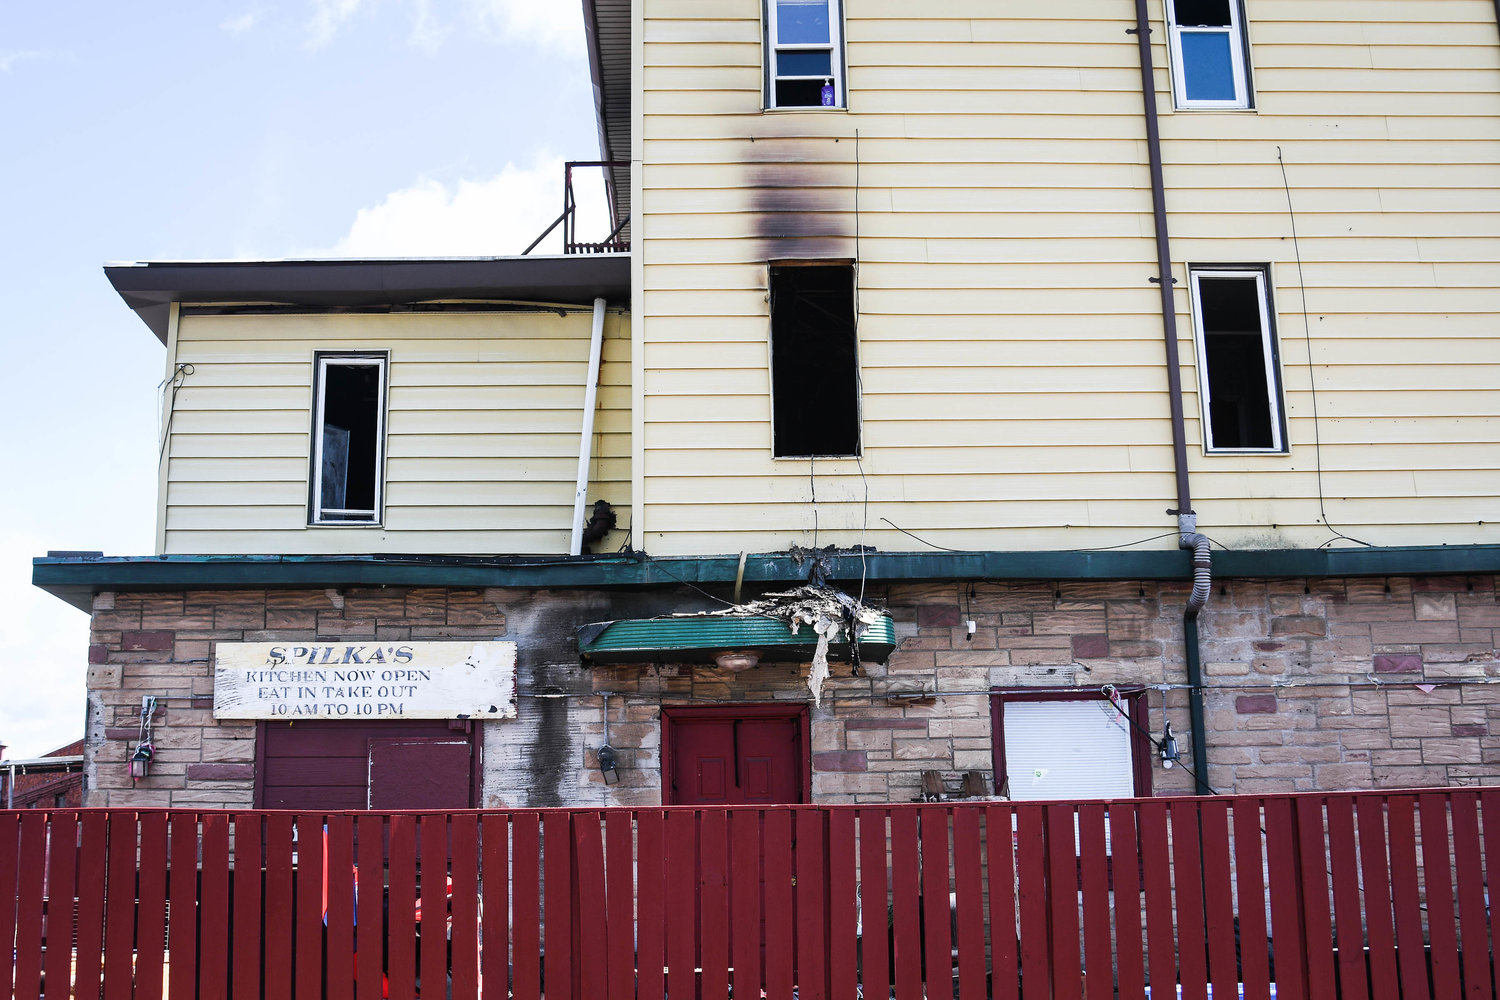 Ten adults and one infant have been displaced from the upstairs apartments at this Stark Street building in Utica, following an early morning fire on Wednesday, Aug. 3. Authorities said the fire was contained to the second-floor apartment where it started.